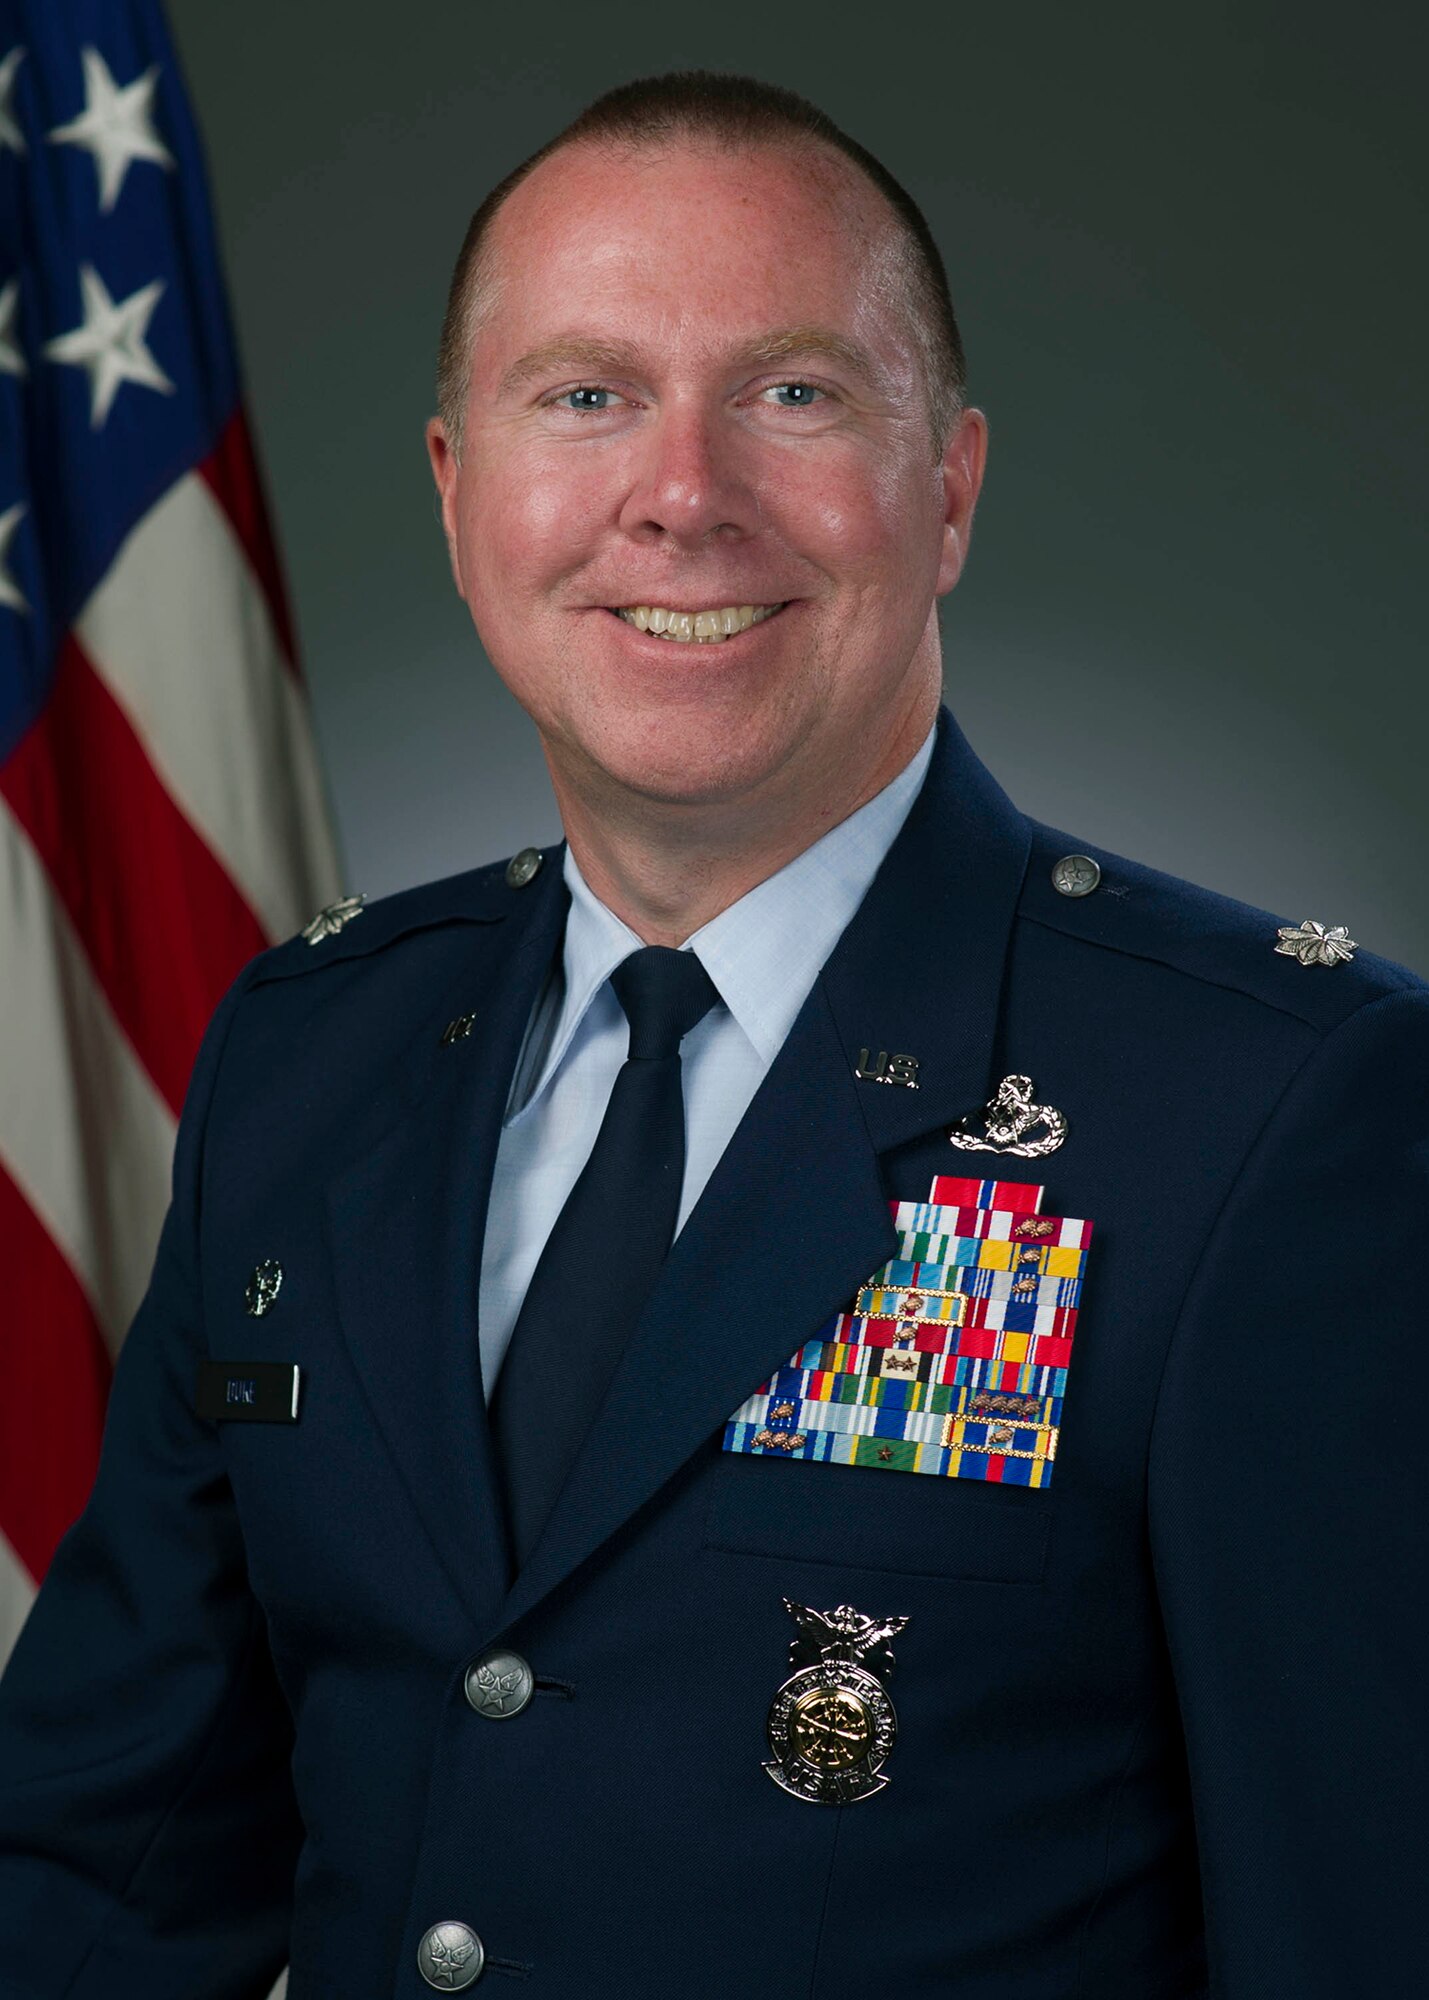 Commentary by Lt. Col. James Duke, 60th Civil Engineering Squadron